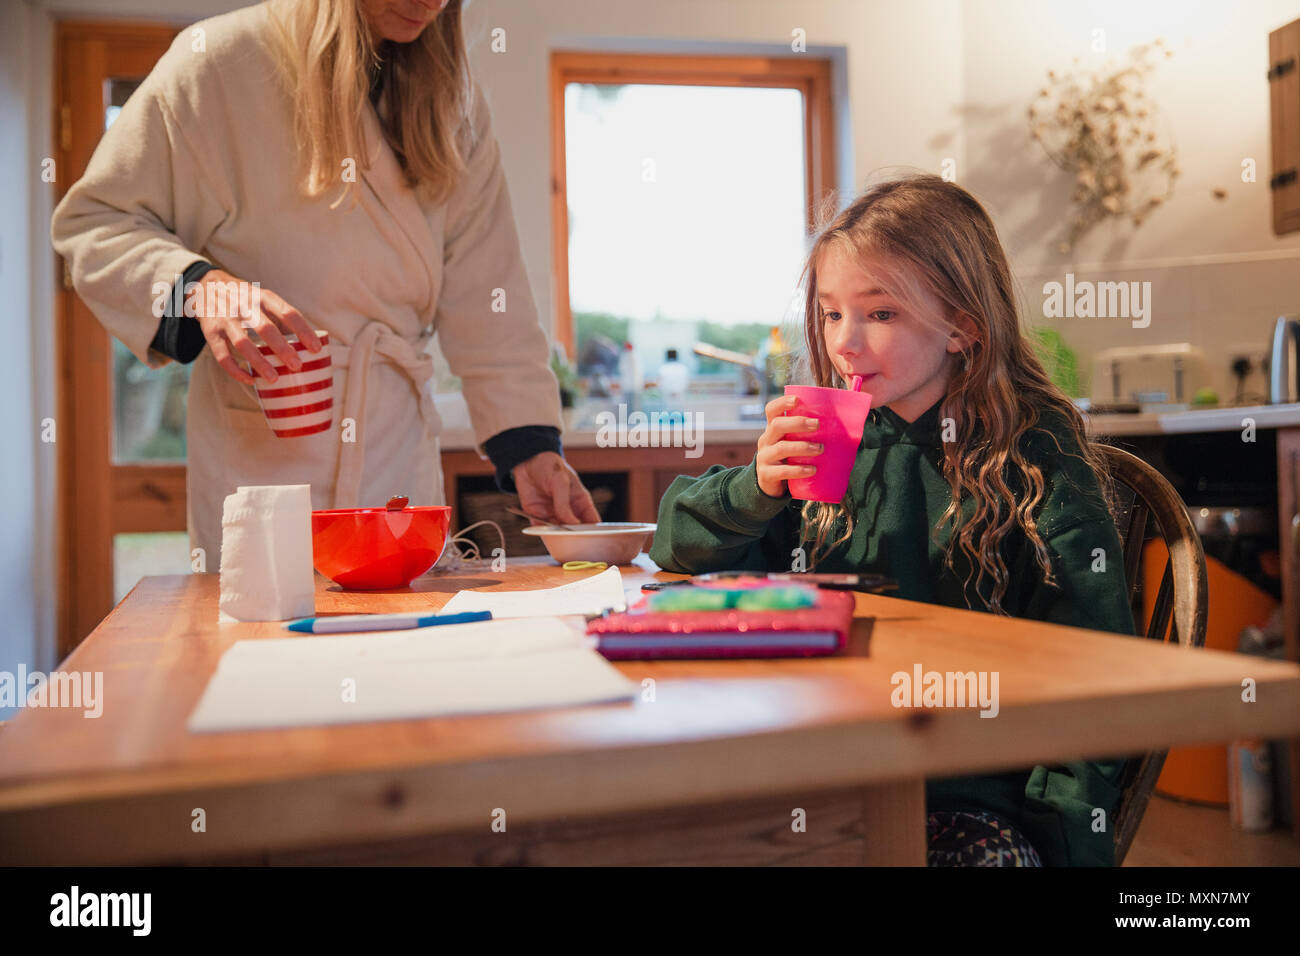 Mother cleaning up after her daughter has finished breakfast Stock Photo